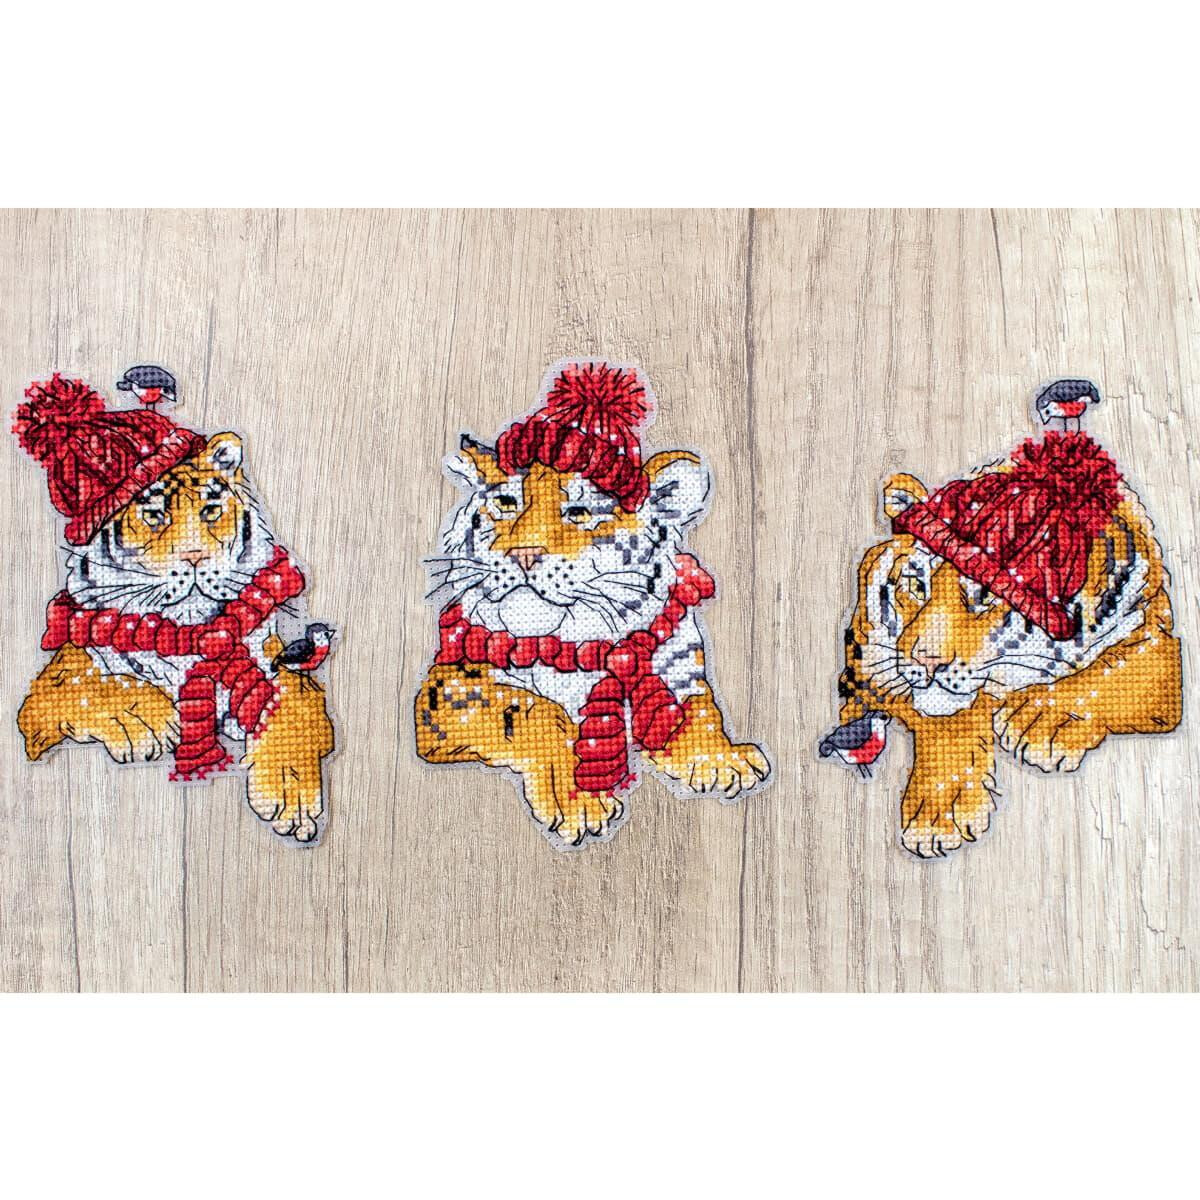 Three cartoon-style tiger cubs wear red winter hats and...